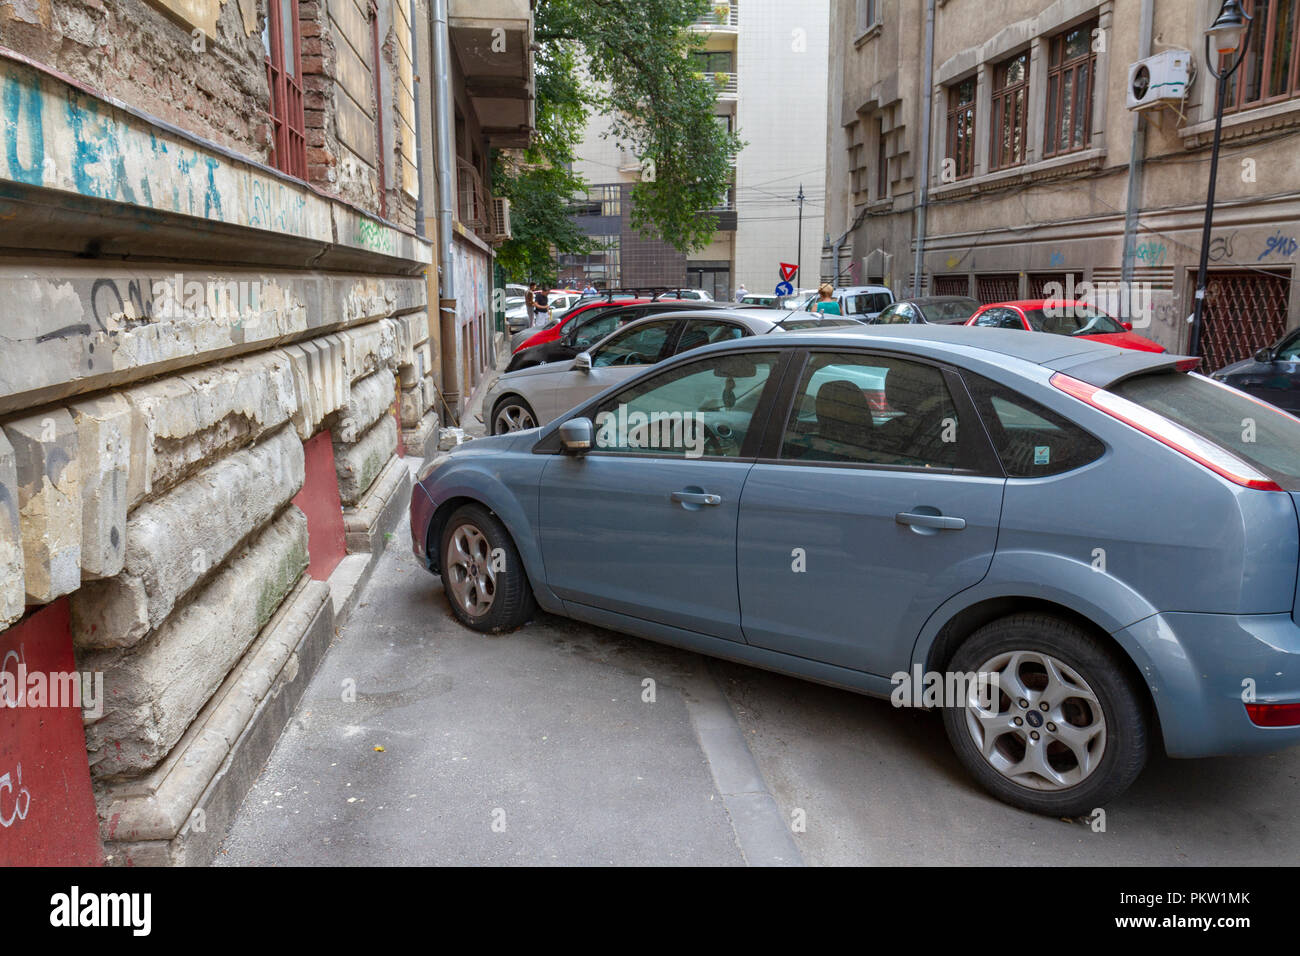 Typical pavement car parking in central Bucharest, Romania.  Parking on pavements, in driving lanes & blocking others is normal in Bucharest. Stock Photo